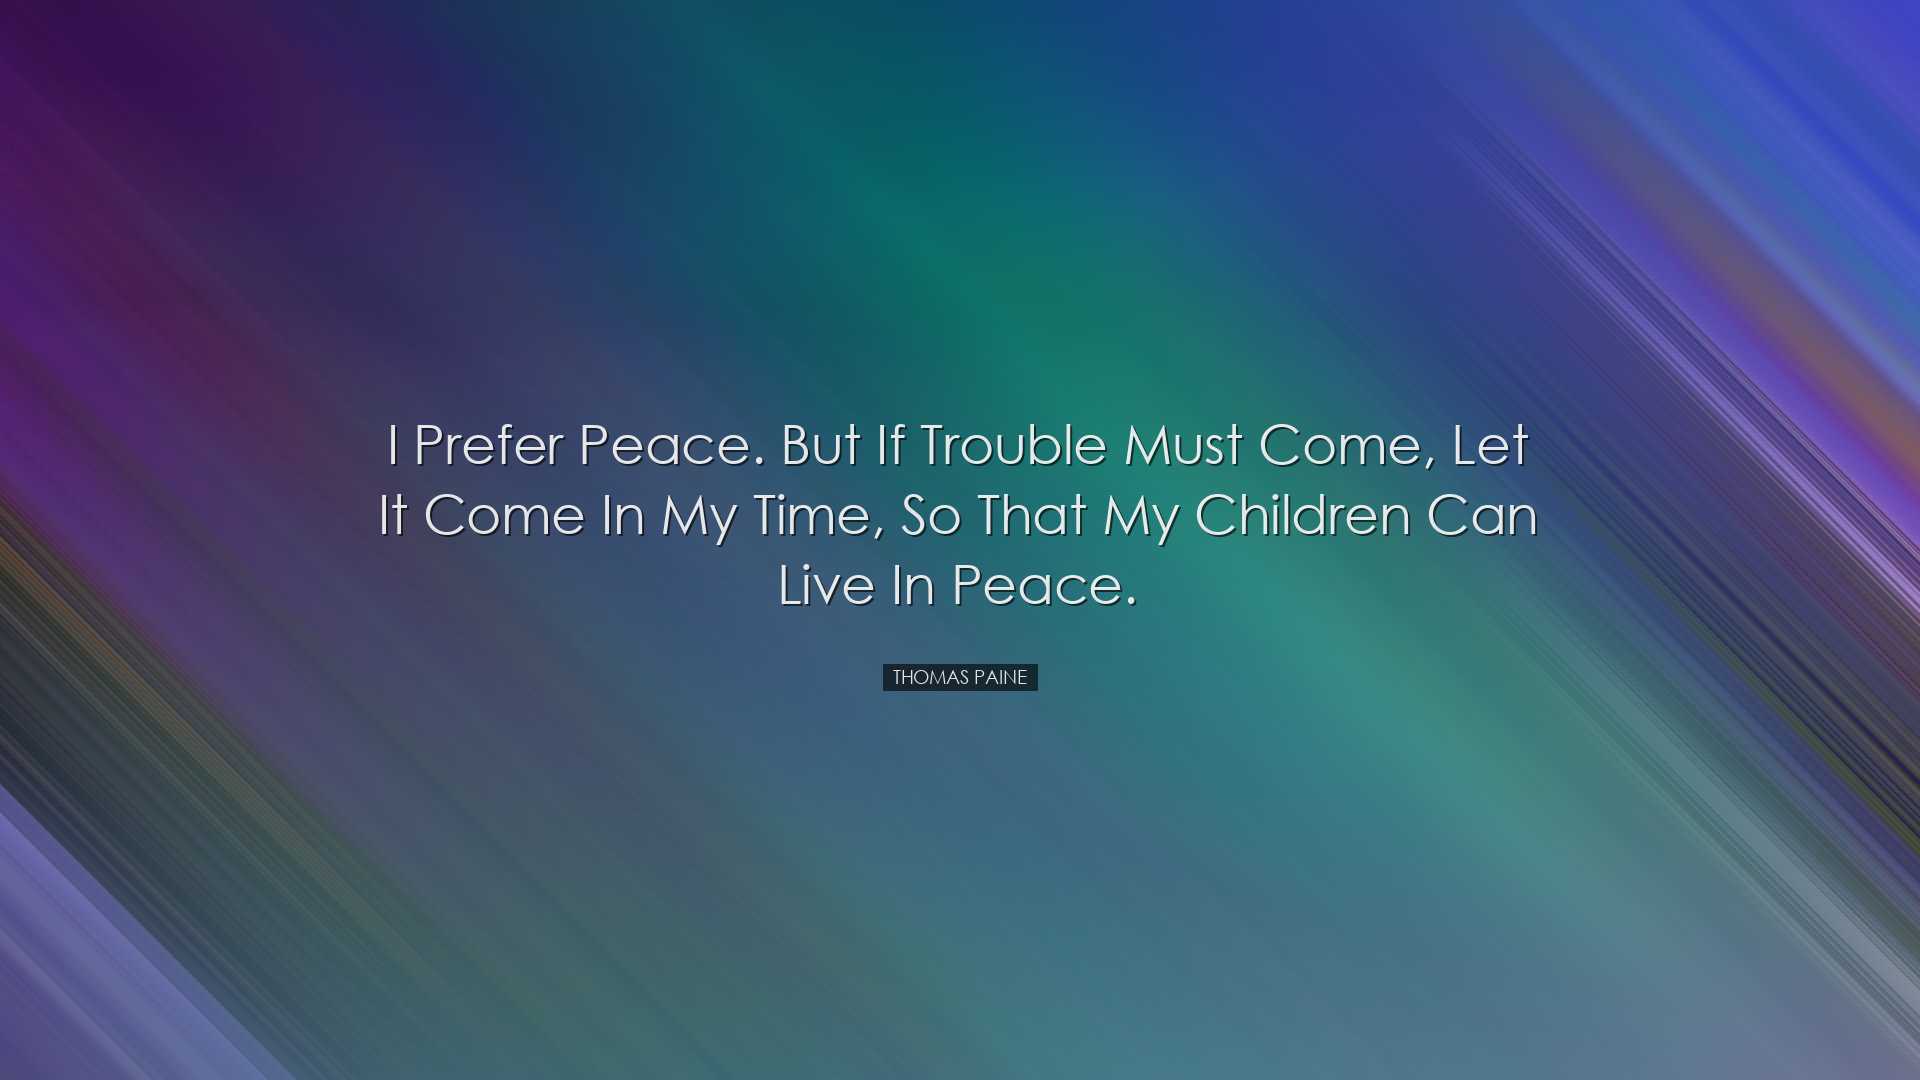 I prefer peace. But if trouble must come, let it come in my time,